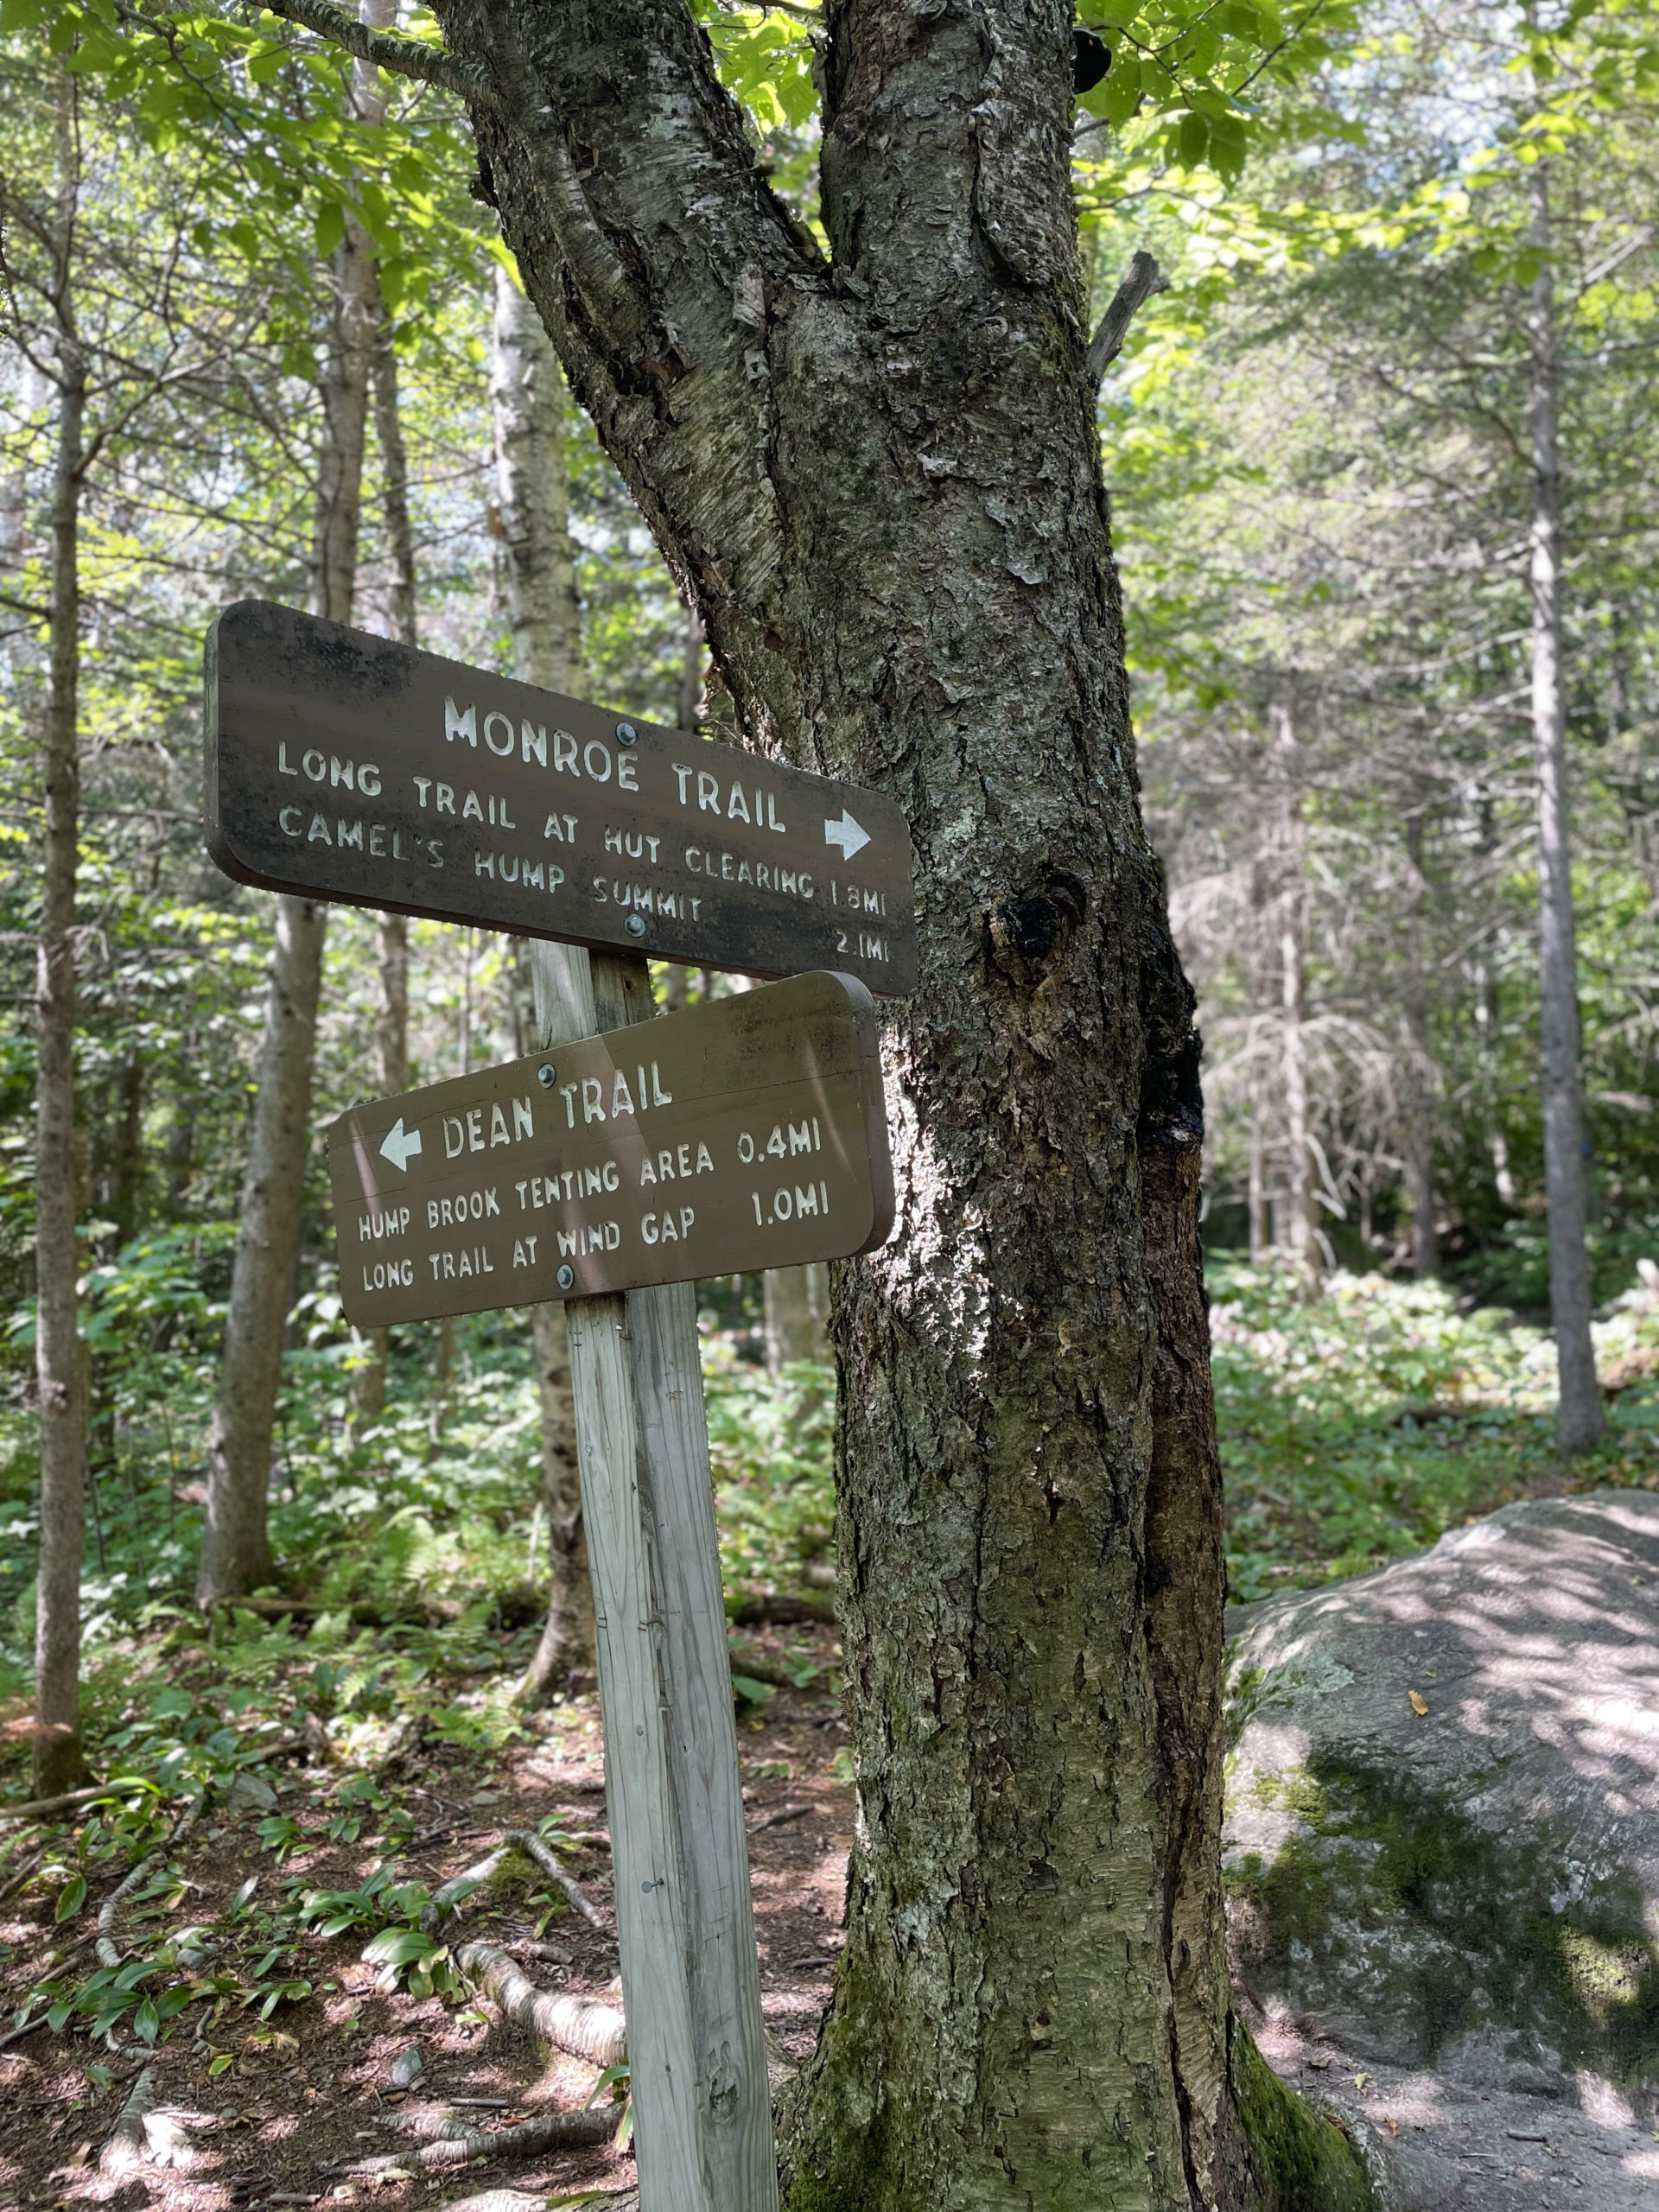 Monroe Trail sign, seen while hiking Camel's Hump in the Green Mountains, Vermont